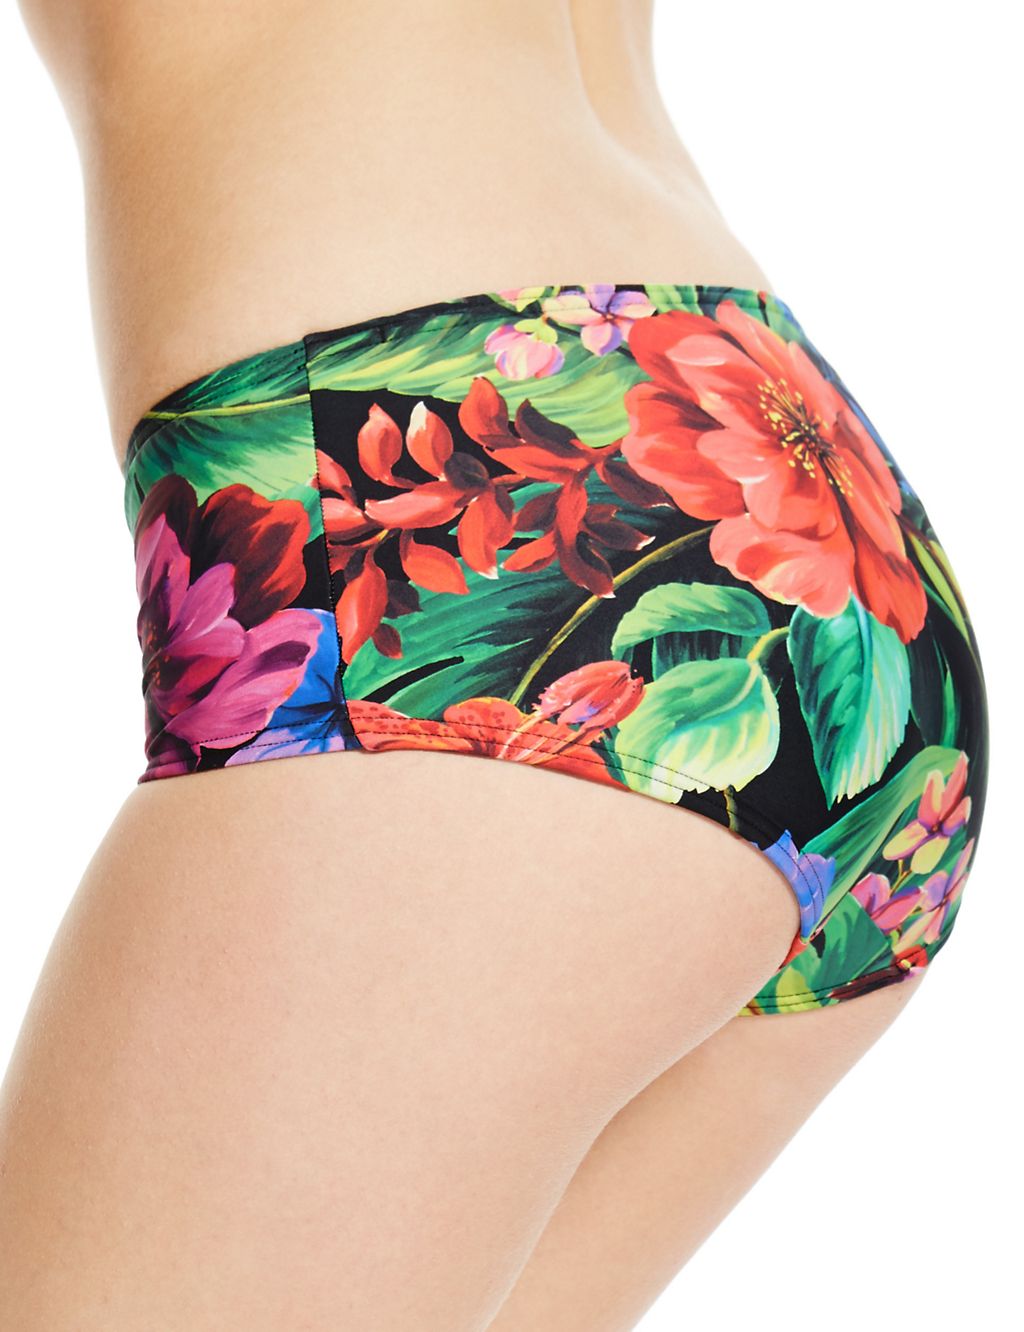 Exotic Floral Shorts Style Bikini Bottoms 2 of 3